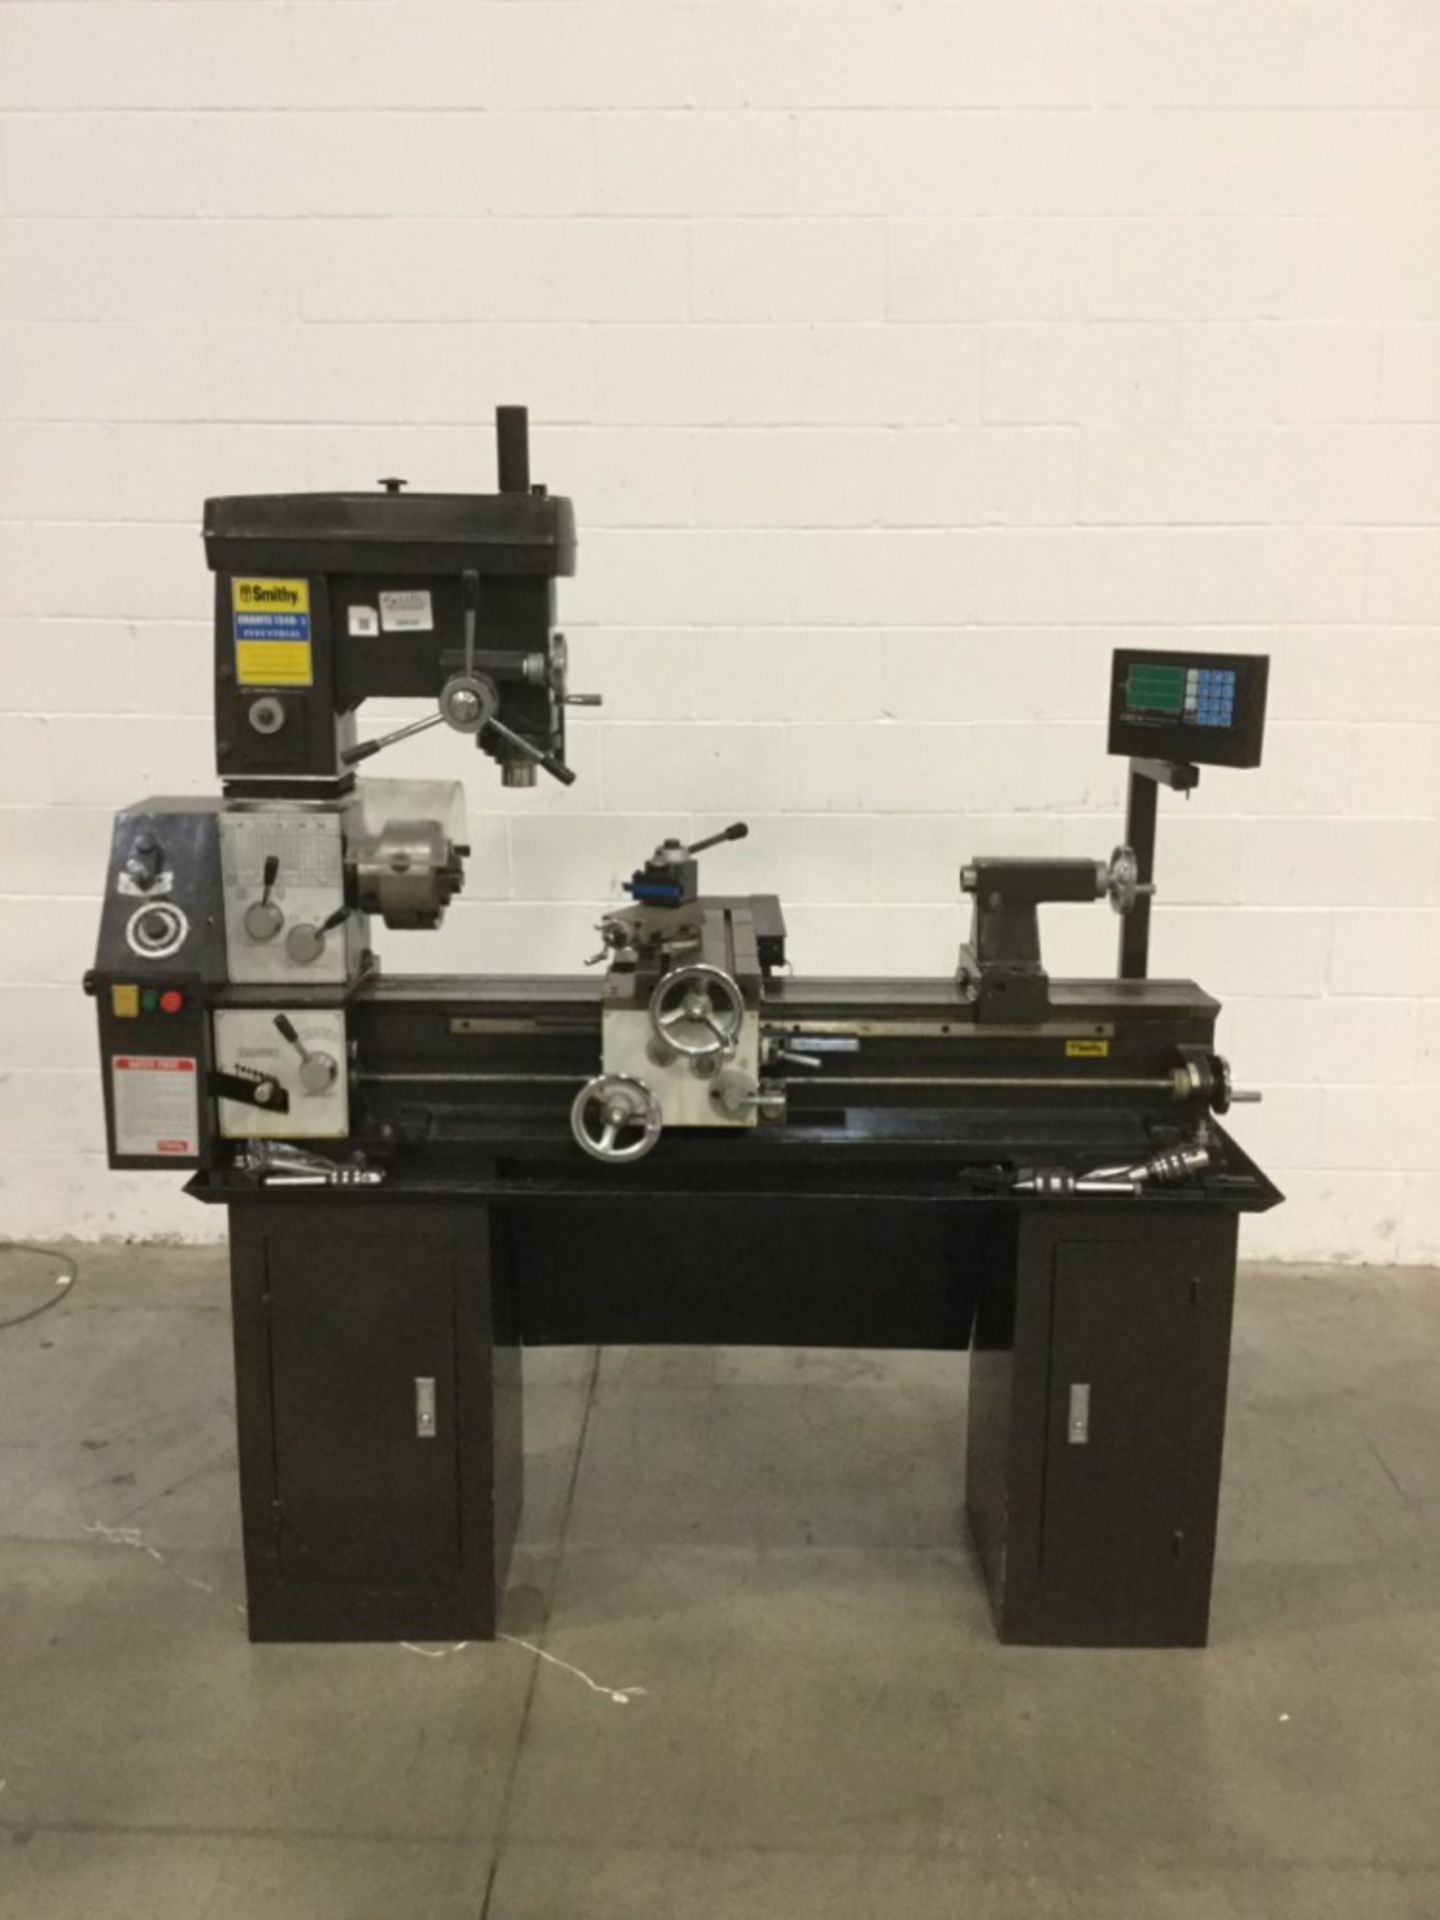 Smithy G1340-I Bench Top 3-in-1 Drilling and Milling Lathe